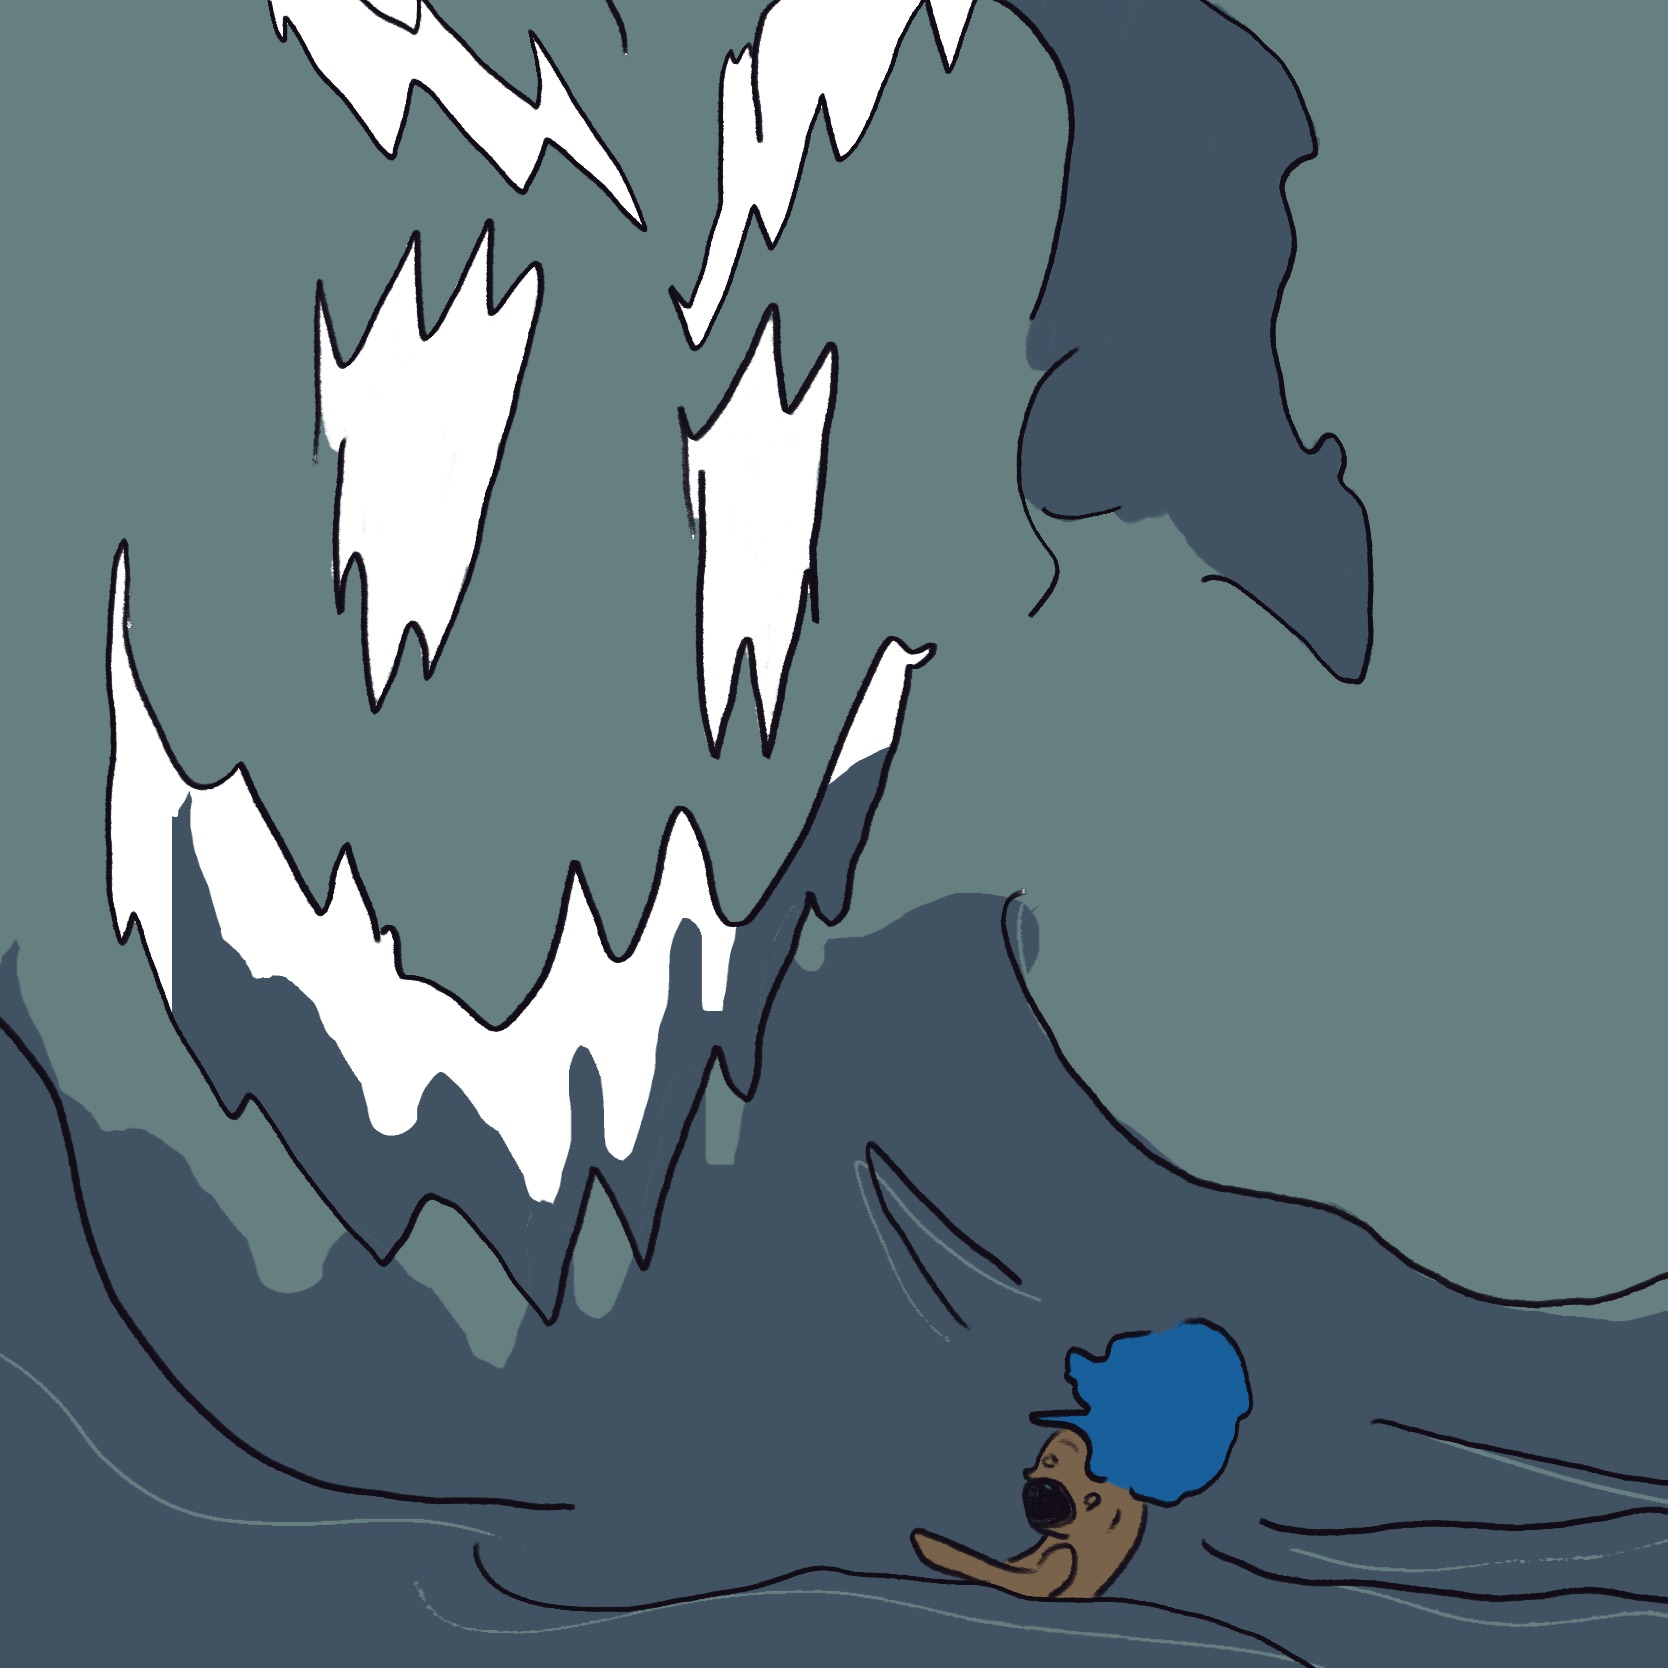 Flow is excessively contemplating his fear of water, which correlates with the concept of him perceiving himself as an island, as an excessive level of fear can lead to disconnection from reality.